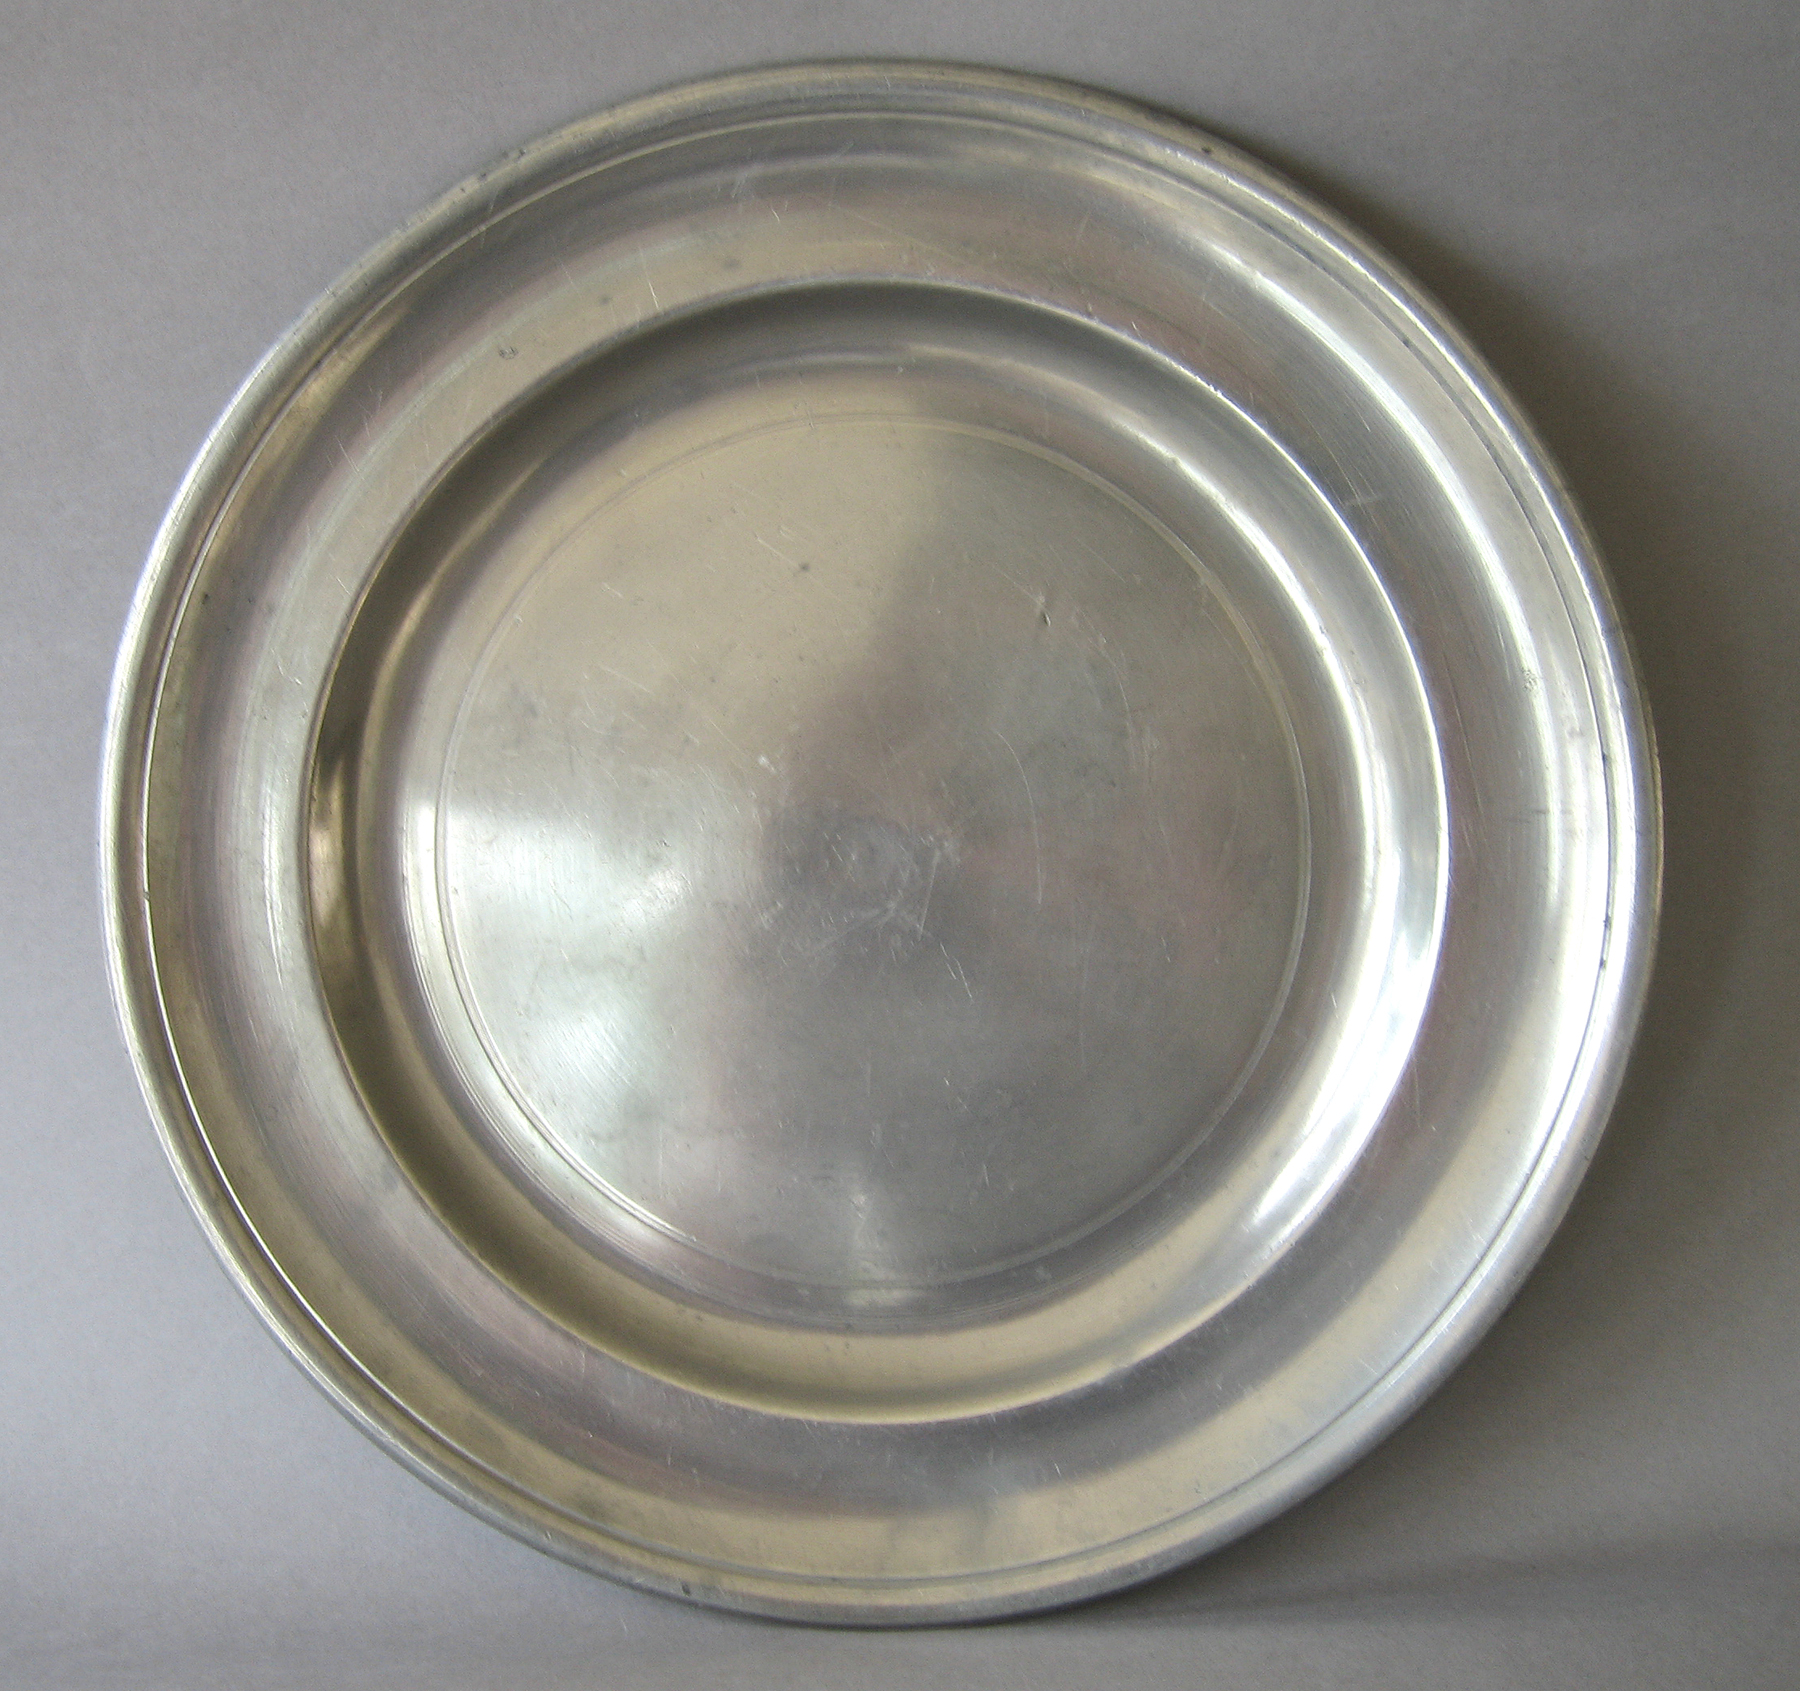 1955.0048.037 Pewter plate